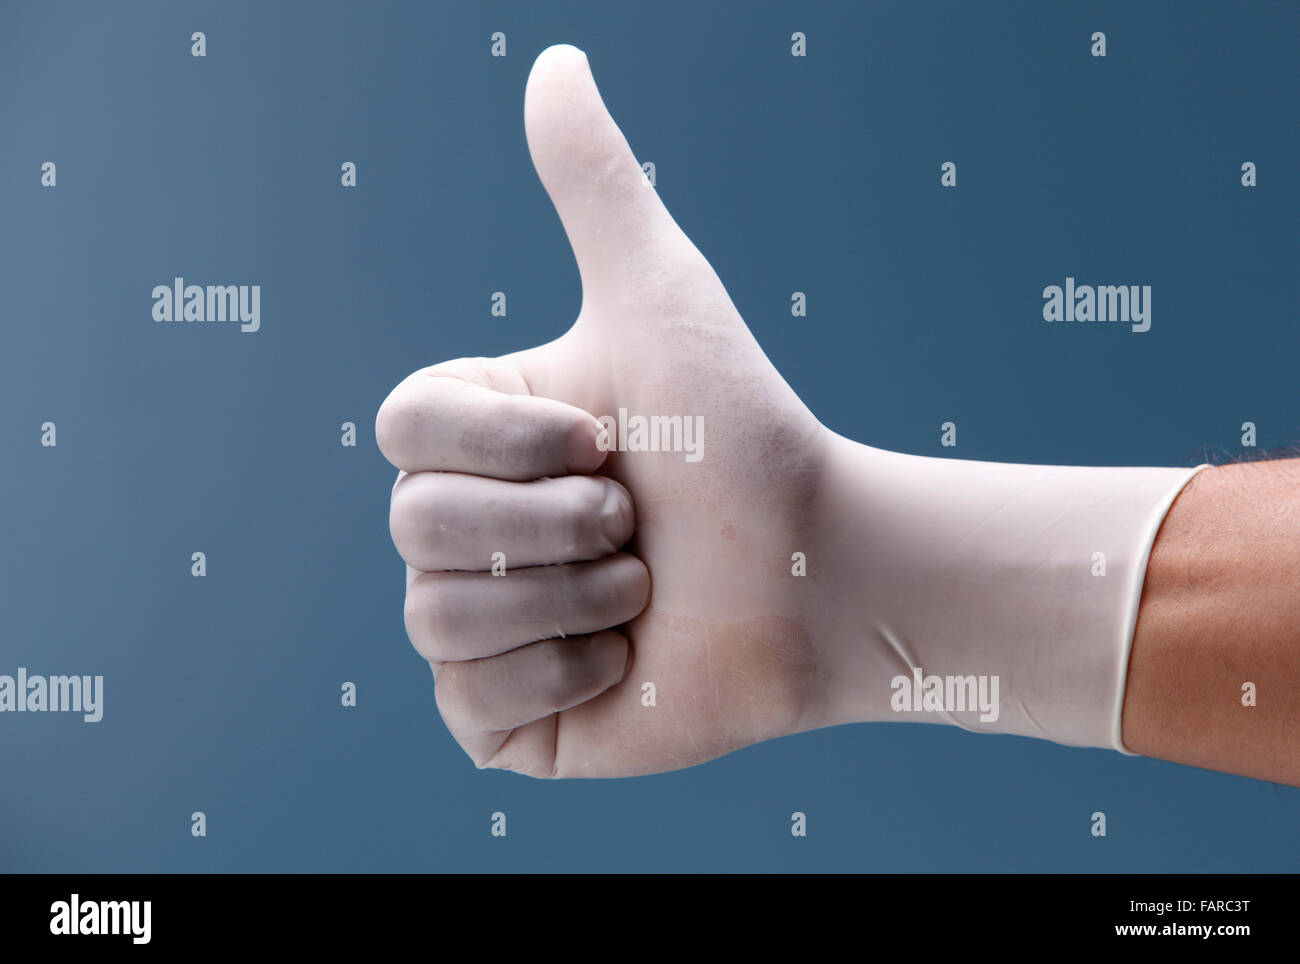 Hand shows the gesture on a coloured background. Stock Photo